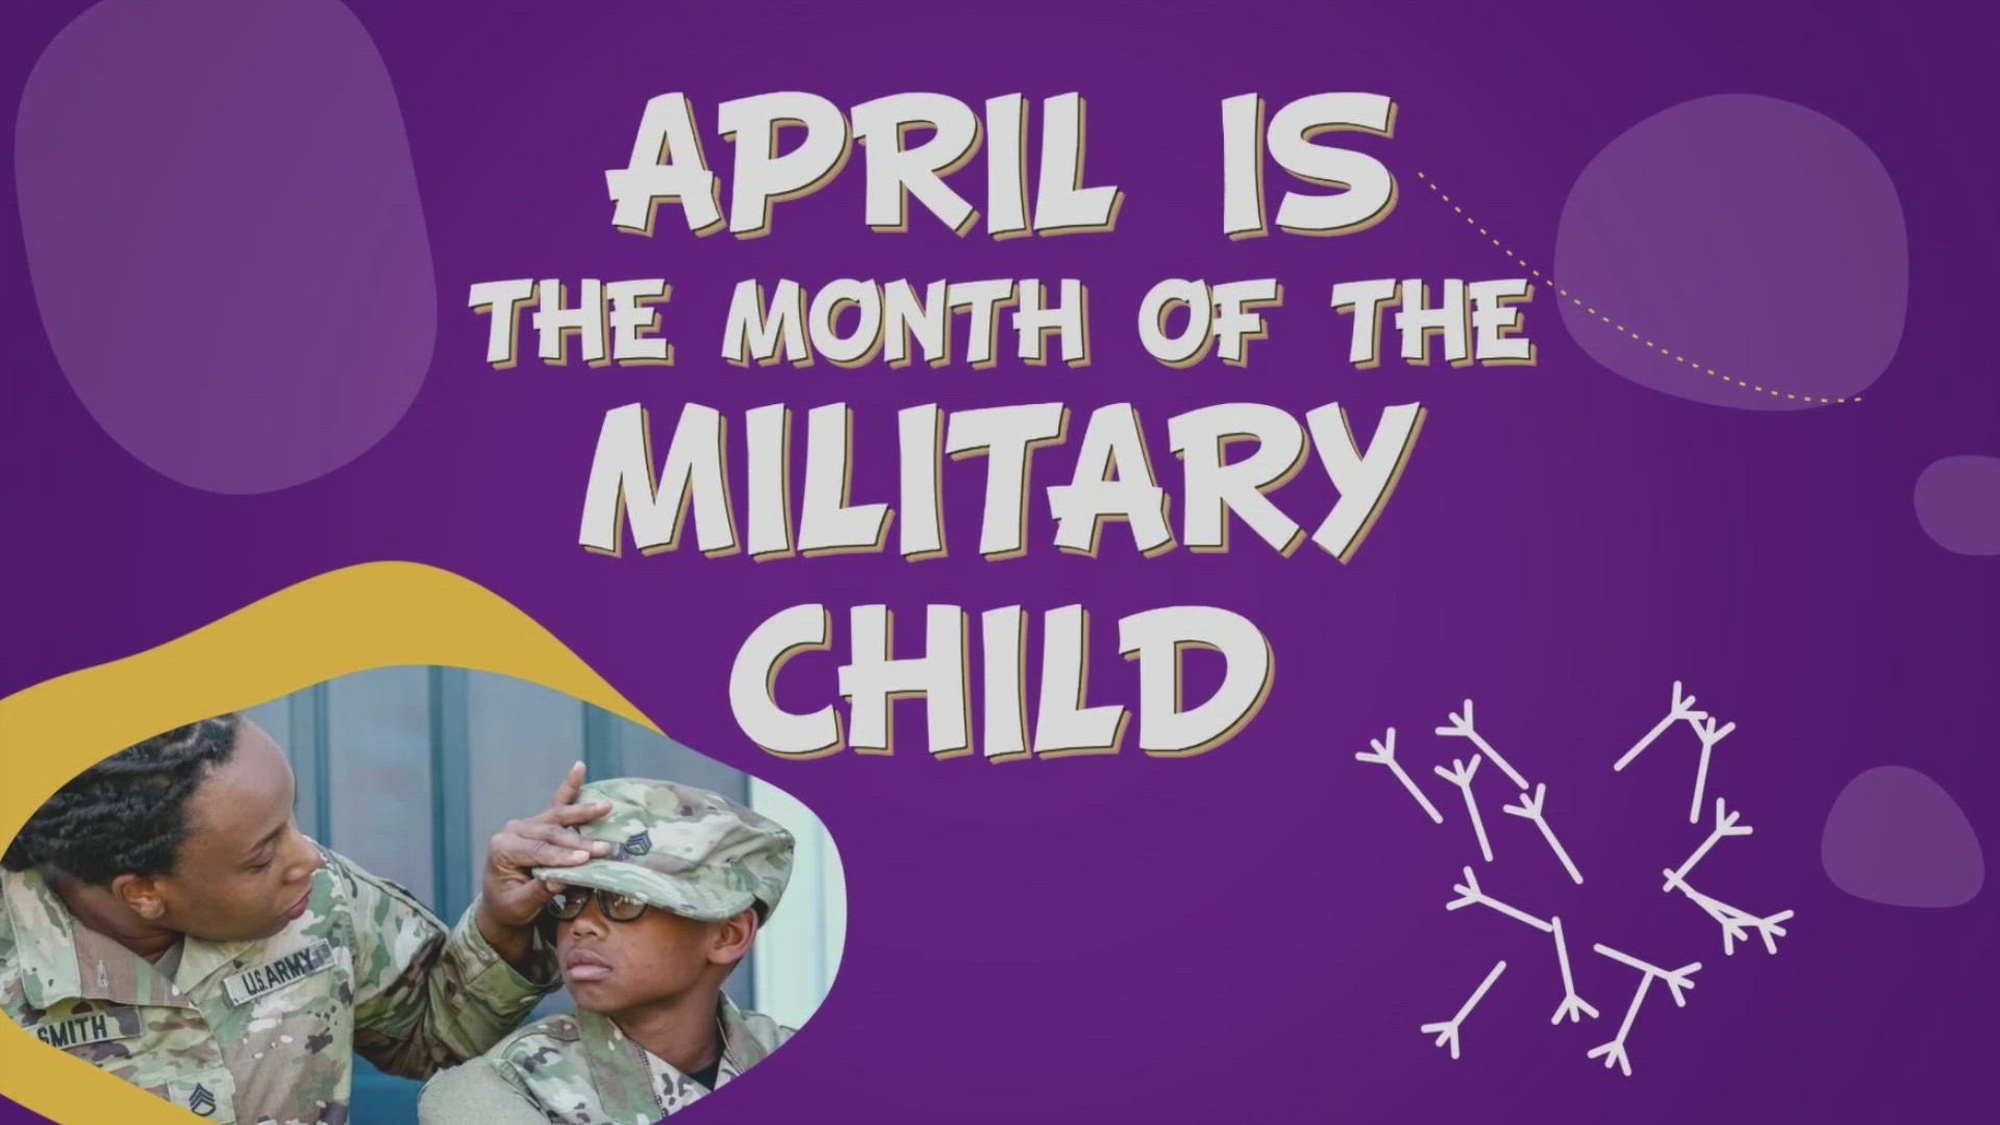 April is the Month of the Military Child and Army leaders marked the occasion by greeting students.